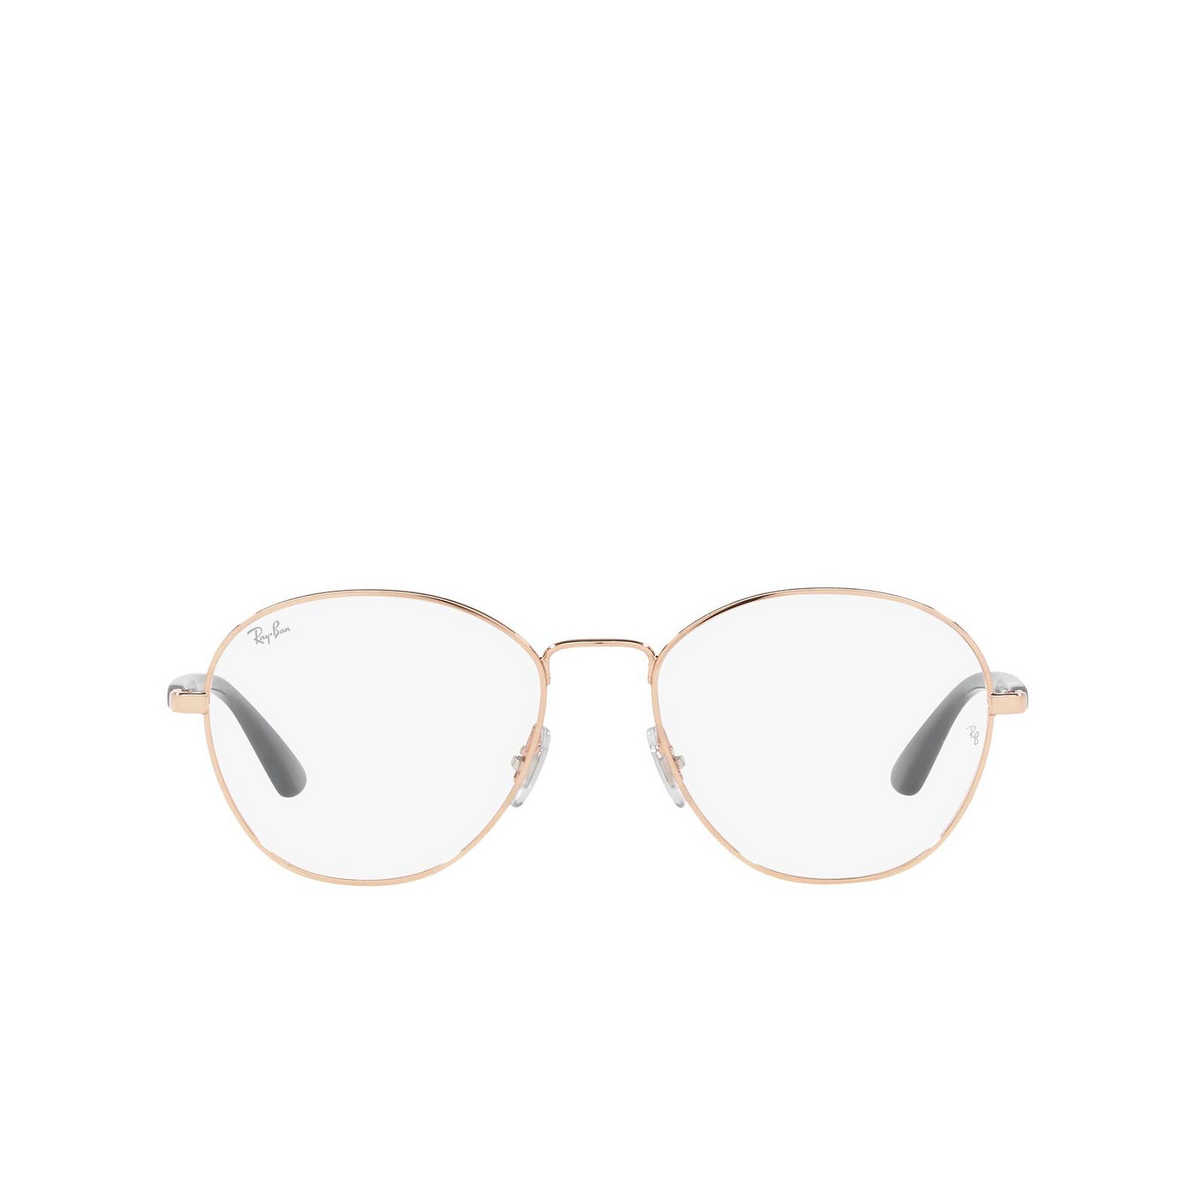 Ray-Ban RX6470 Eyeglasses 3094 Rose Gold - front view